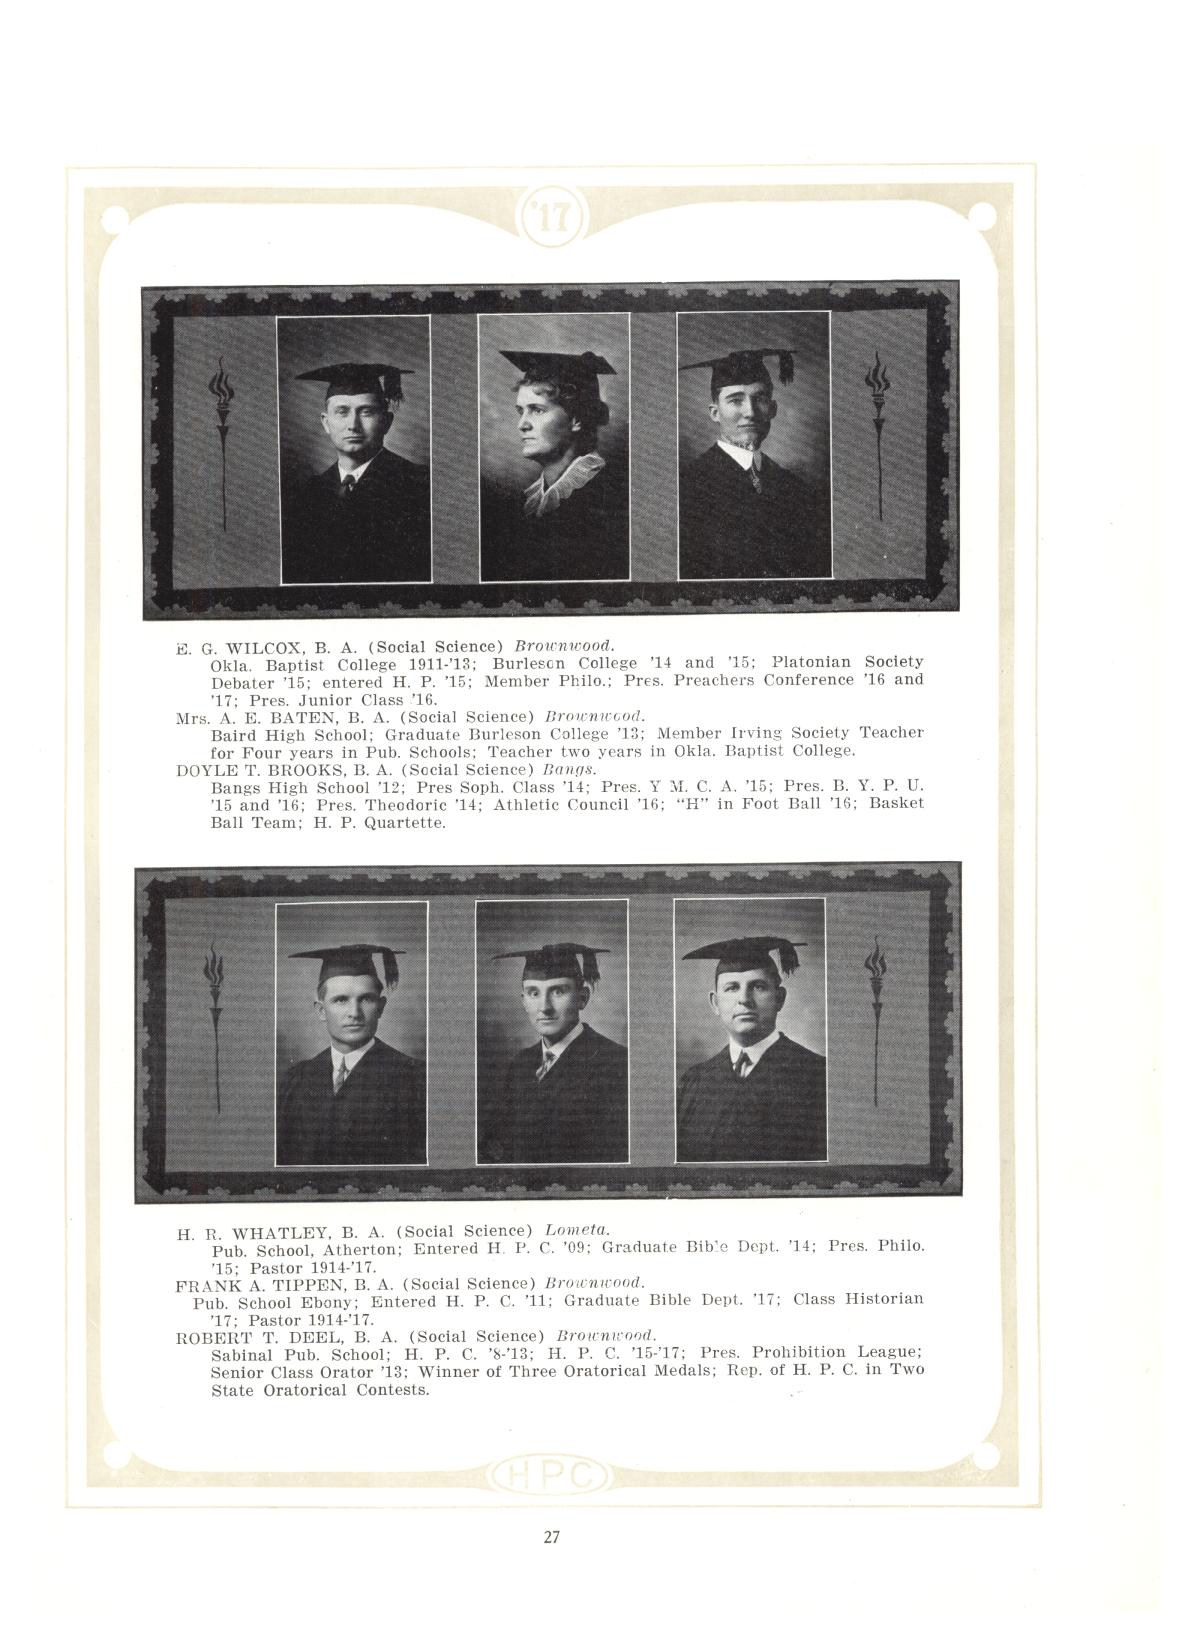 The Lasso, Yearbook of Howard Payne College, 1917
                                                
                                                    27
                                                